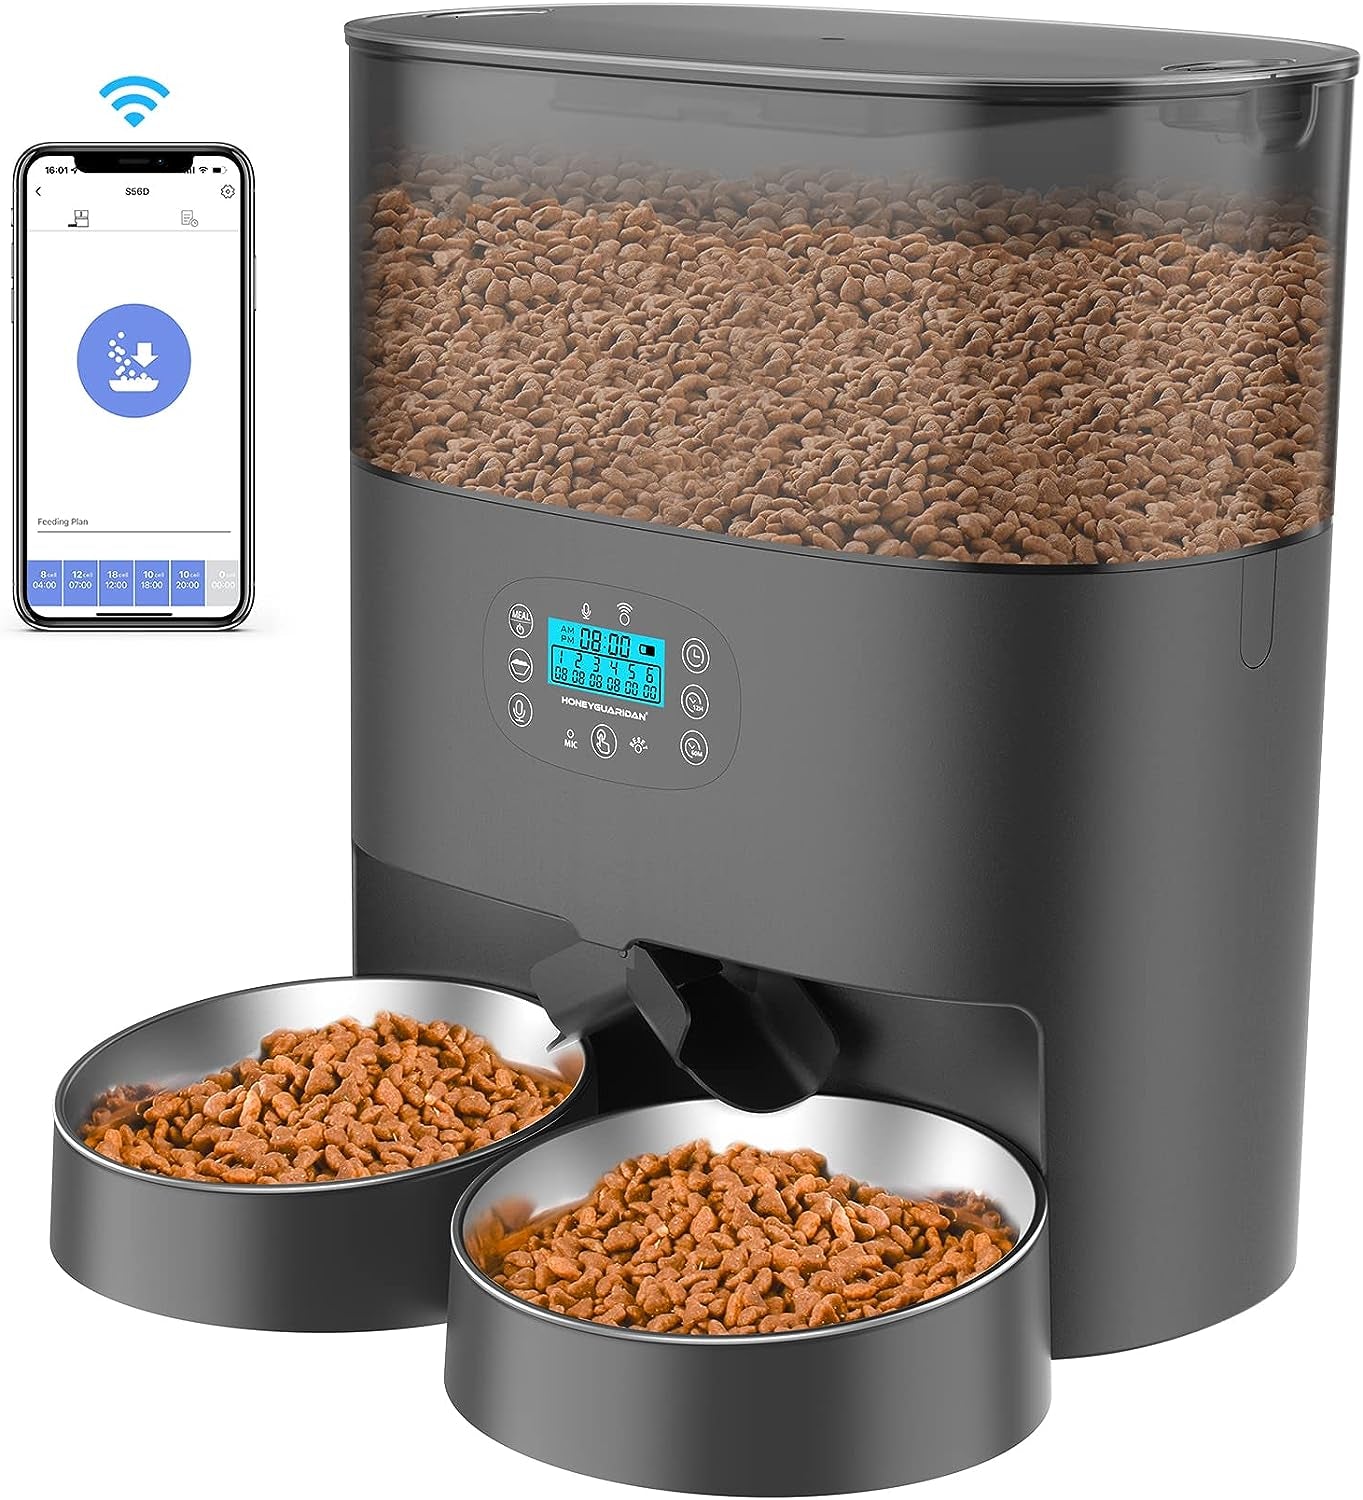 Automatic Pet Feeder with Dual Power Supply and Portion Control for Cats and Dogs